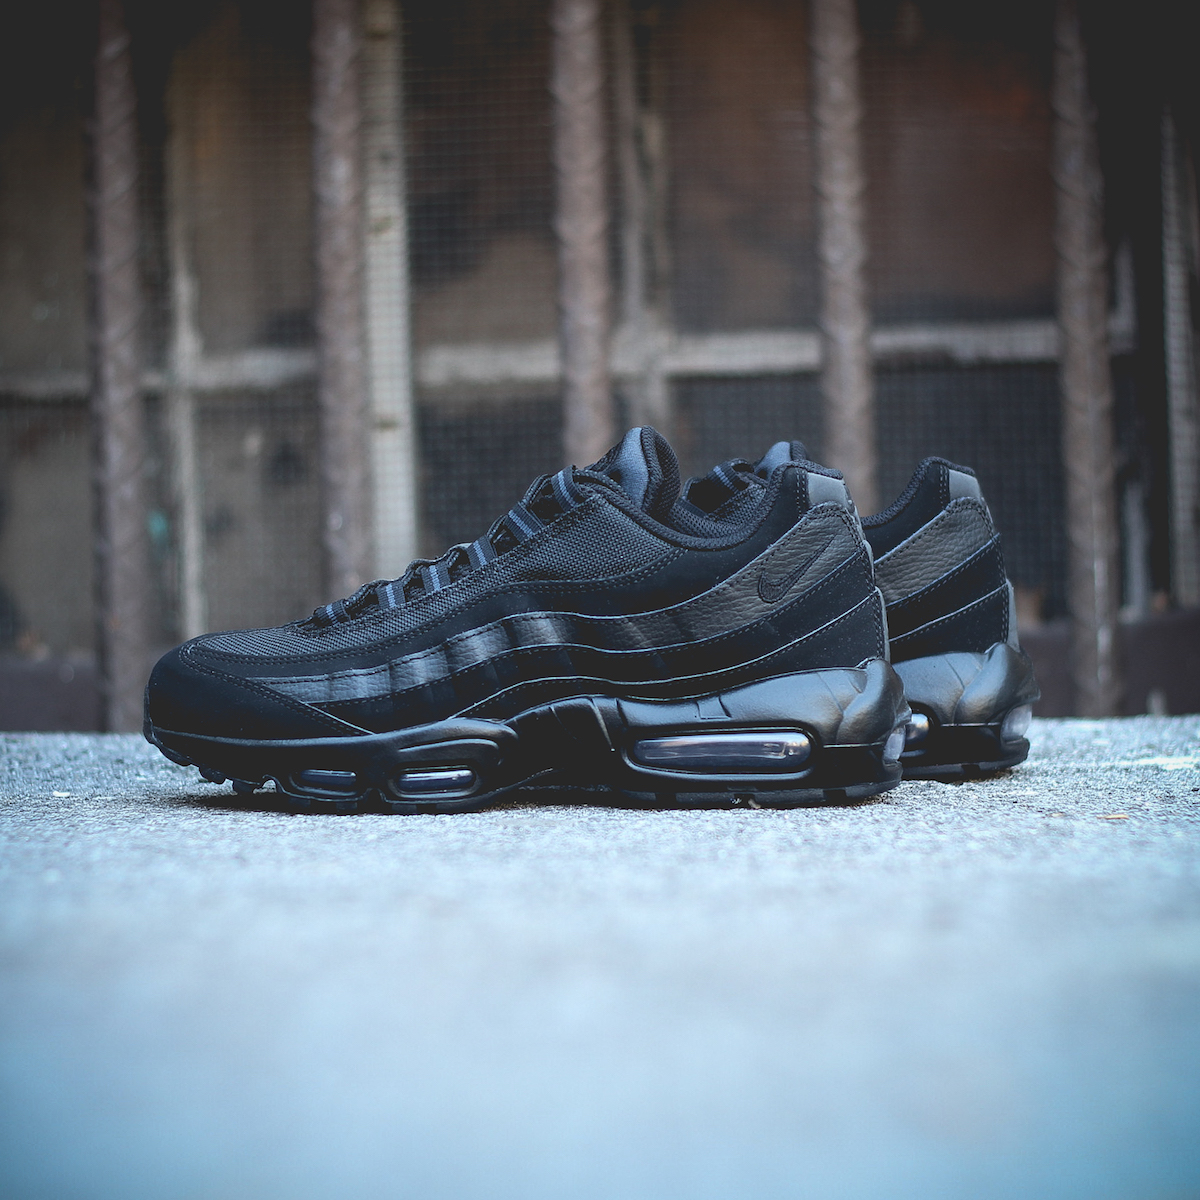 Abstraction Median Chap Finally, the Blacked Out Nike Air Max 95 That Everyone Wants for Work -  WearTesters